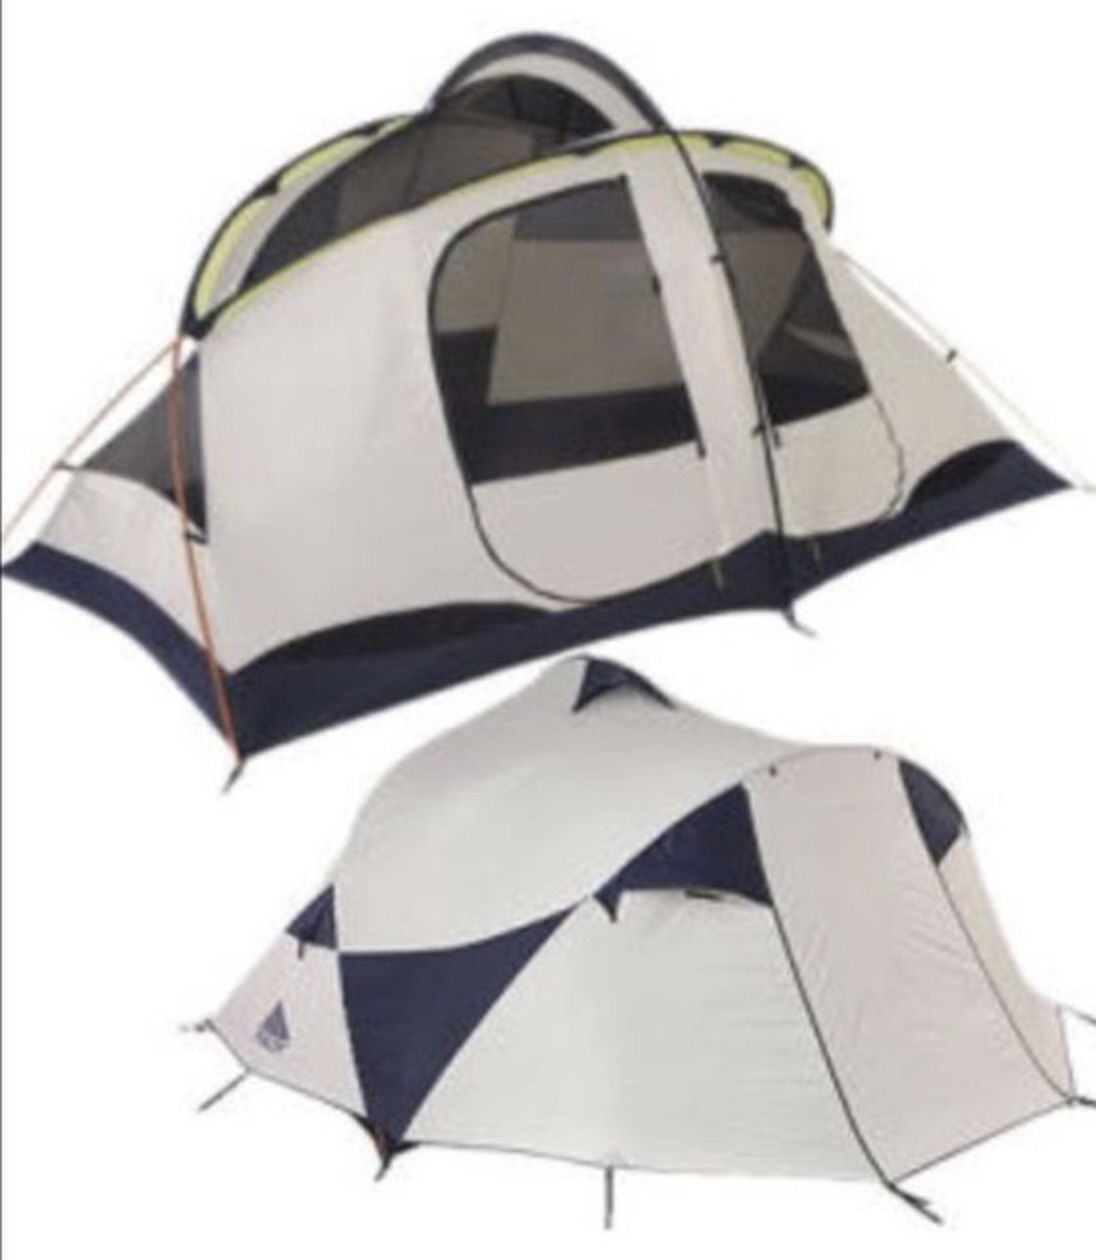 KELTY MANTRA 7 TENT. SLEEPS 7! Two rooms! Like mansion!! Used only one time!! Was $529